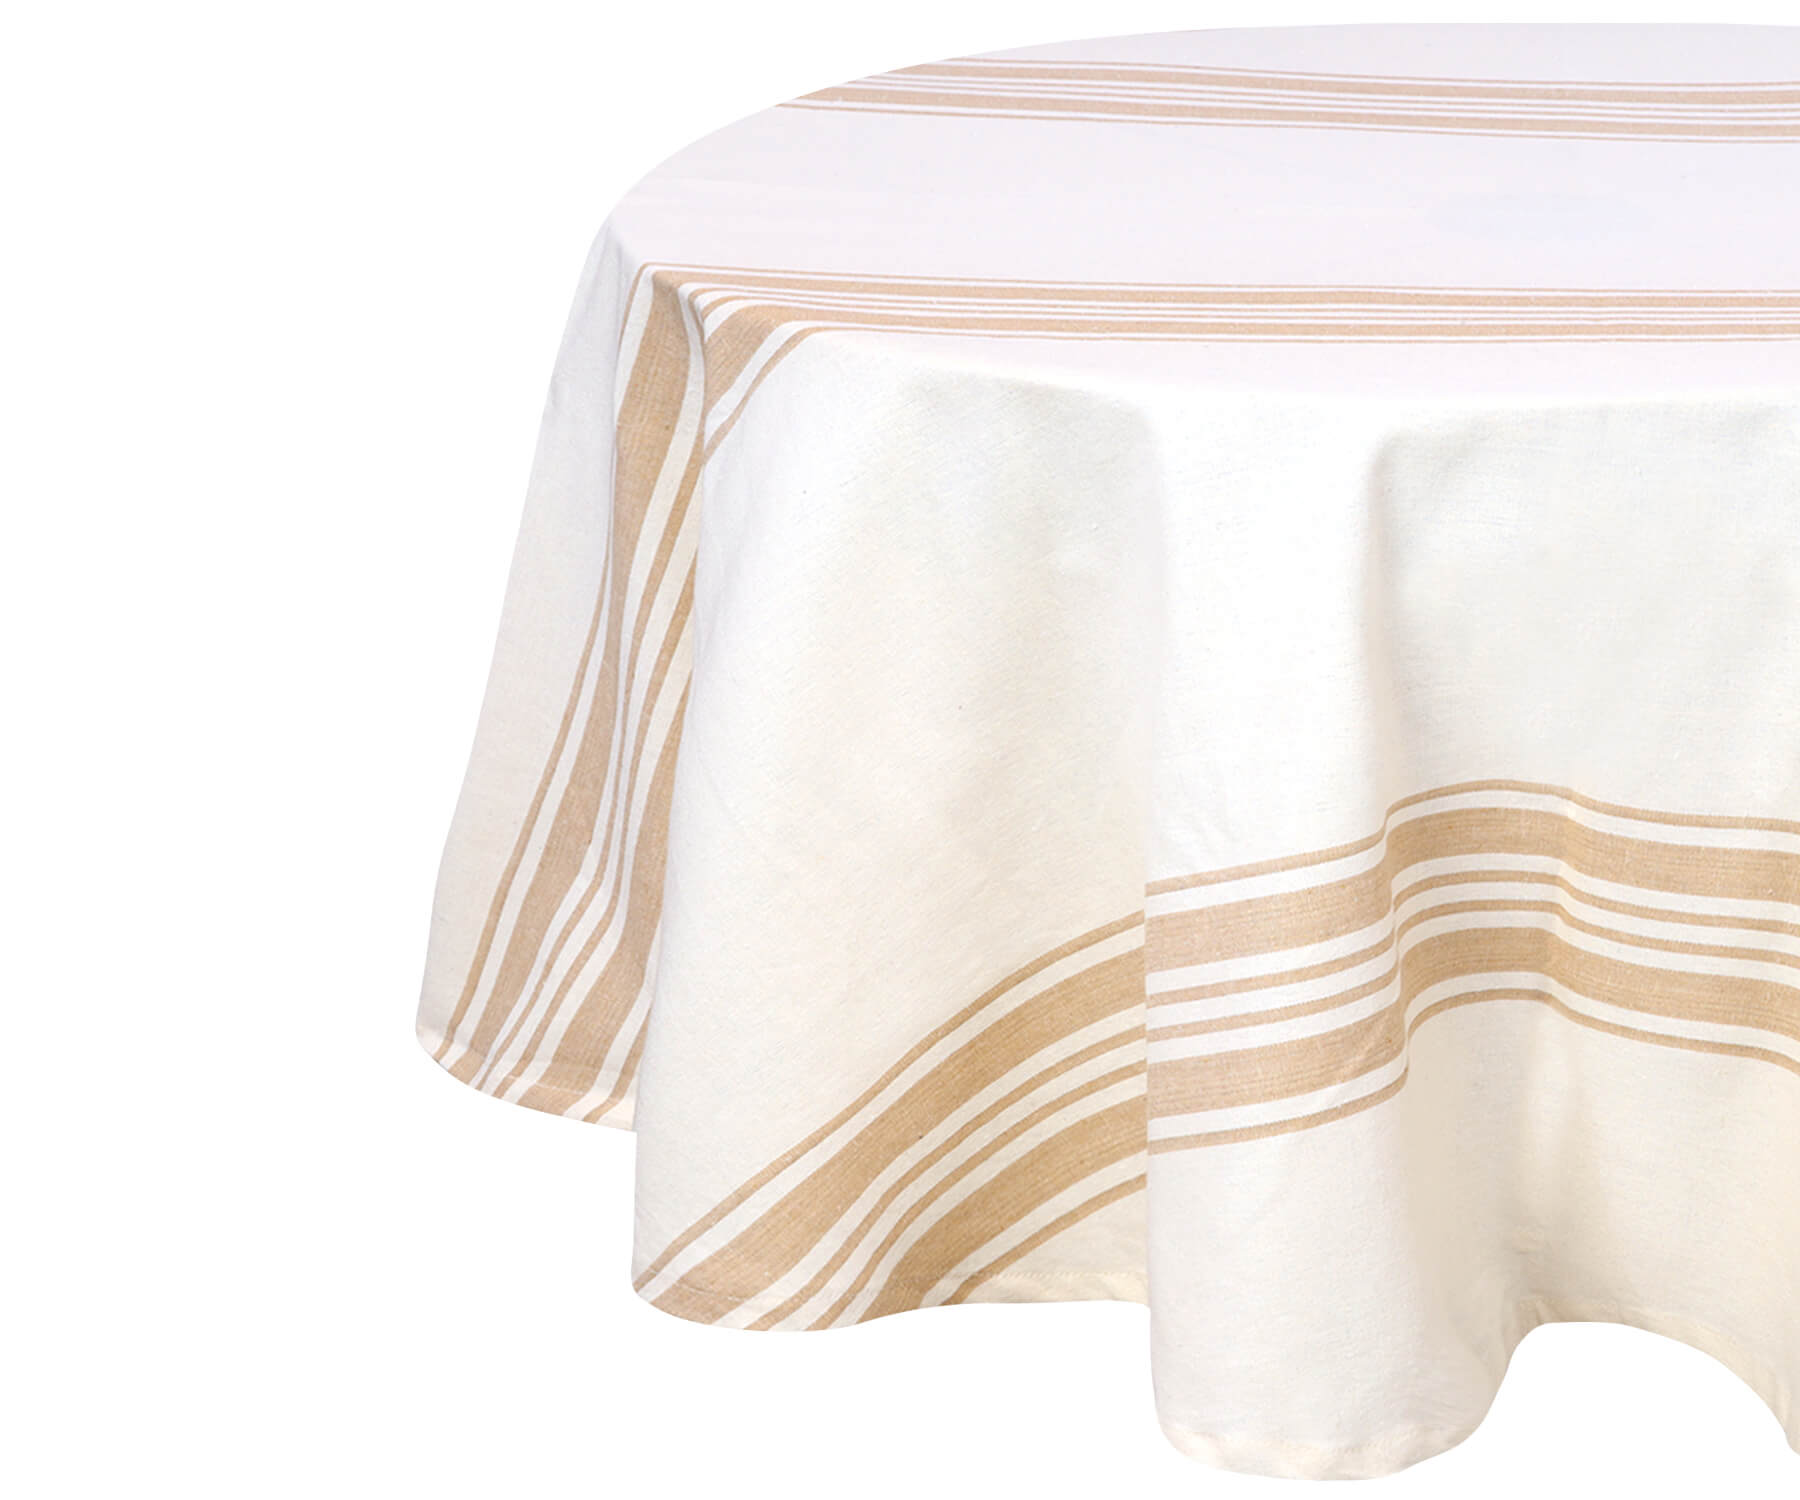 For a clean and pristine look, opt for a round white tablecloth, the epitome of sophistication, suitable for weddings and upscale gatherings.